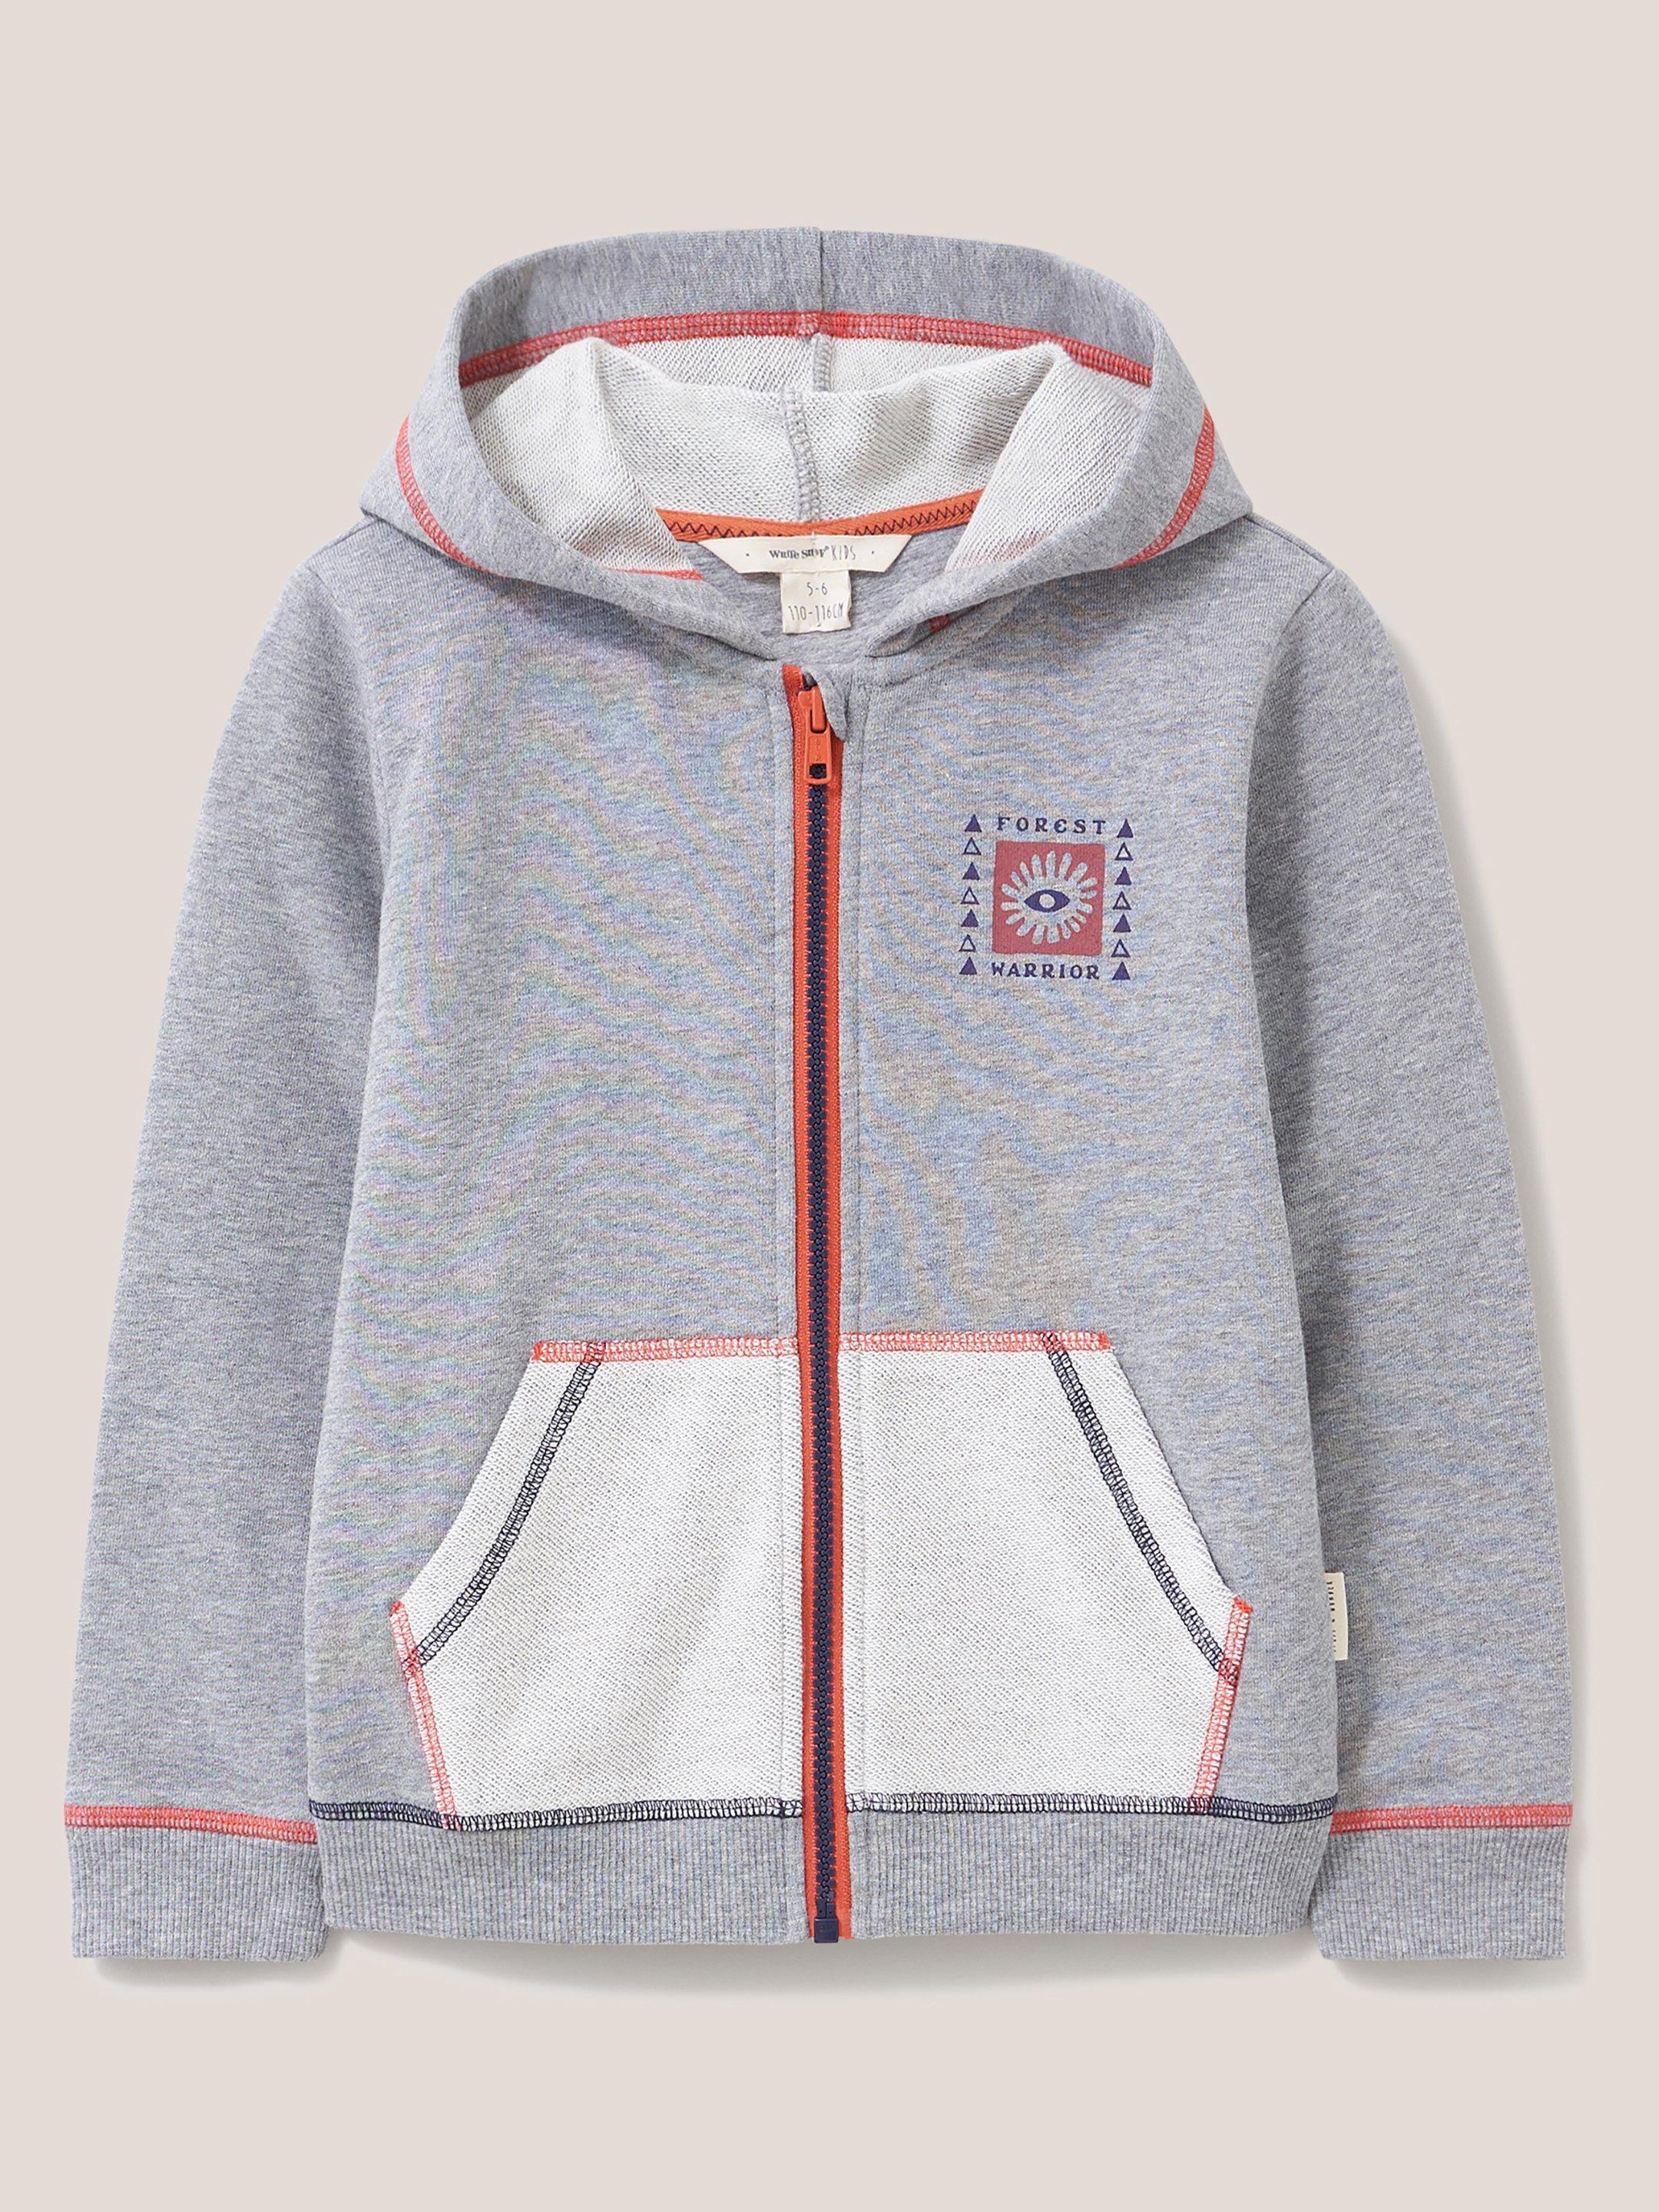 Nature Warrior Graphic Hoodie in GREY MARL - FLAT FRONT